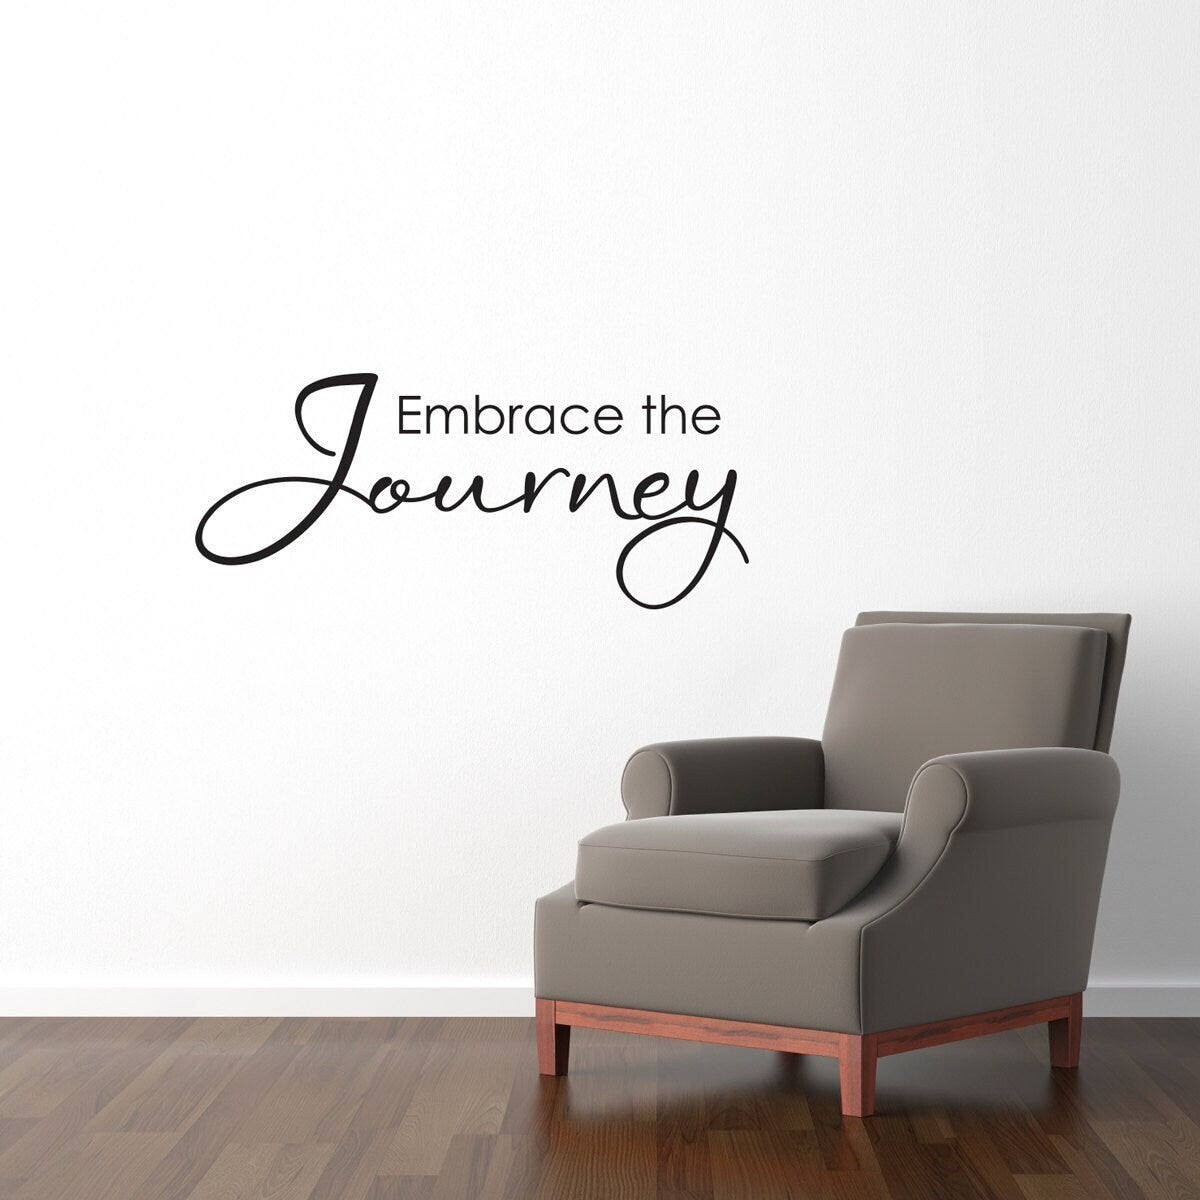 Embrace the Journey Wall Decal | Embrace the Journey Quote | Journey Wall Vinyl